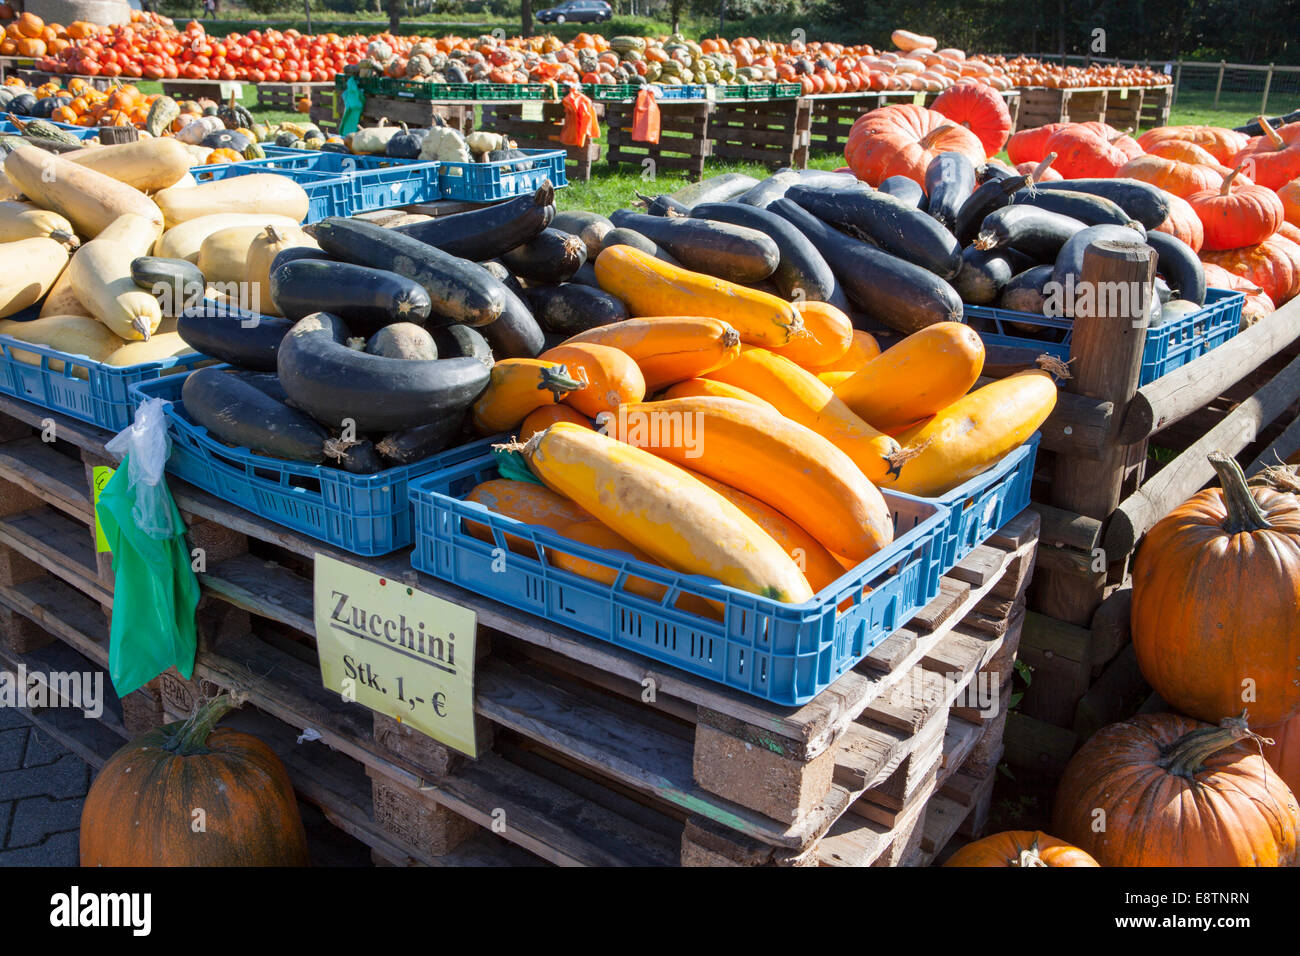 different marrows and squashes, pumpkins, for sale, Germany, Europe Stock Photo